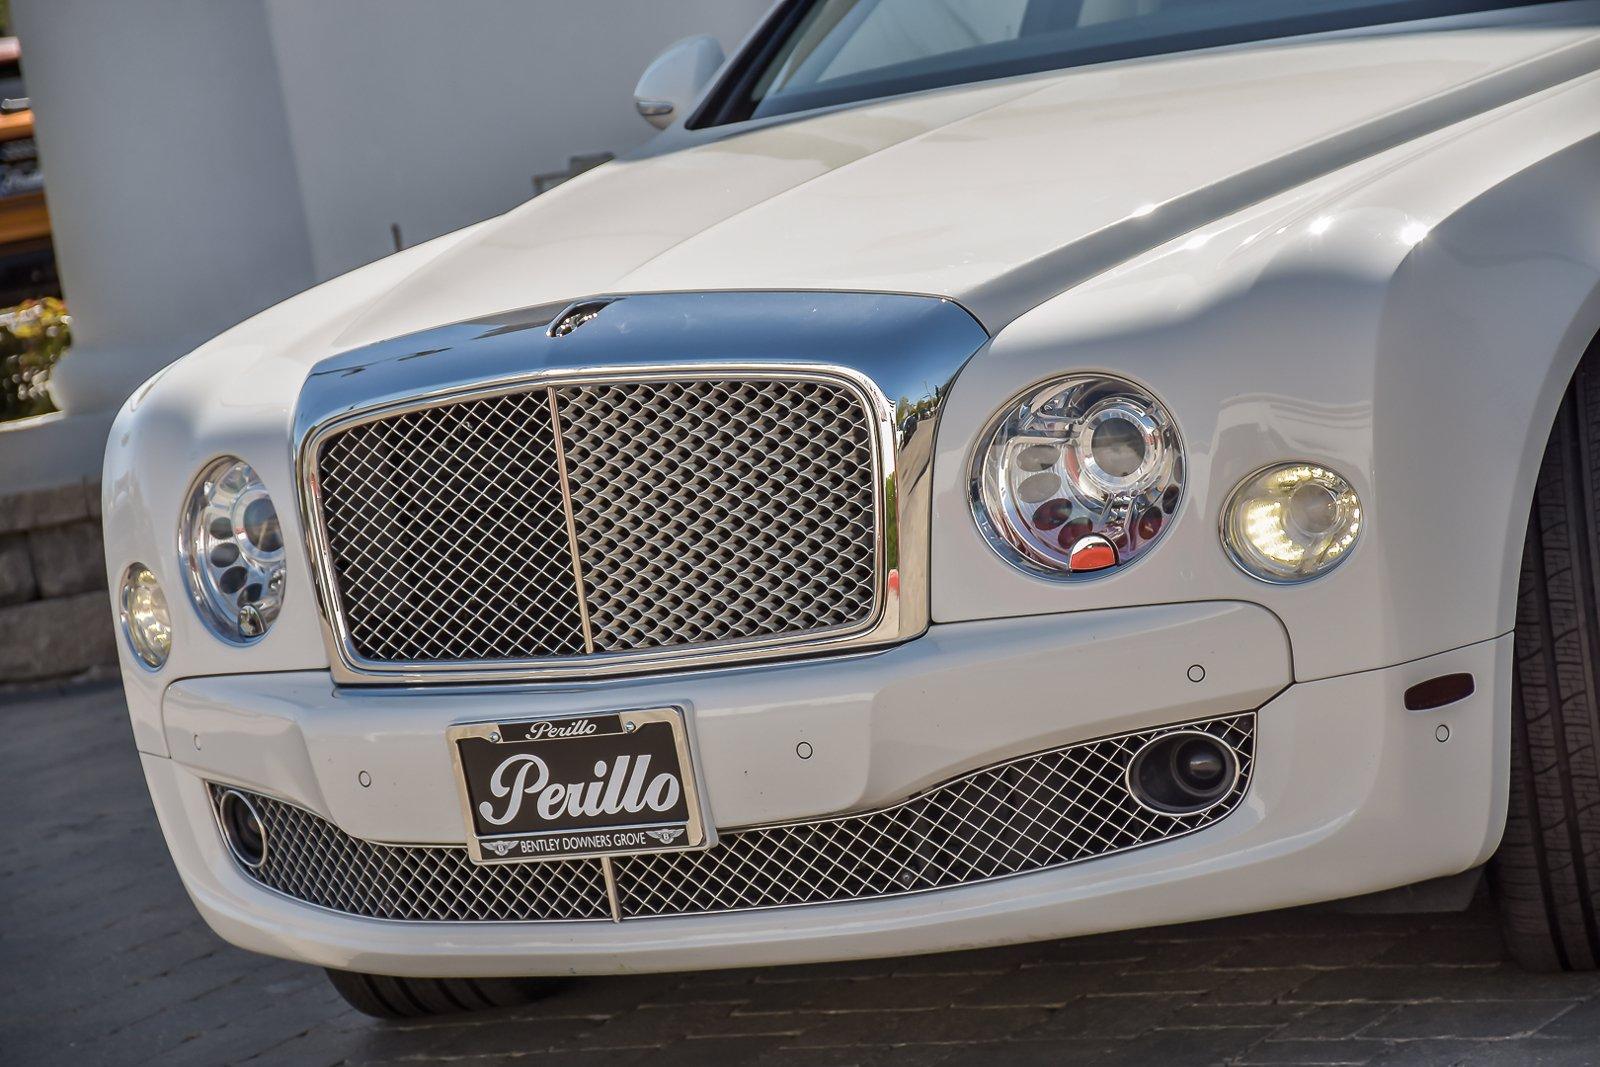 Used 2013 Bentley Mulsanne Premier, Mulliner, Naim, Rear Ent | Downers Grove, IL